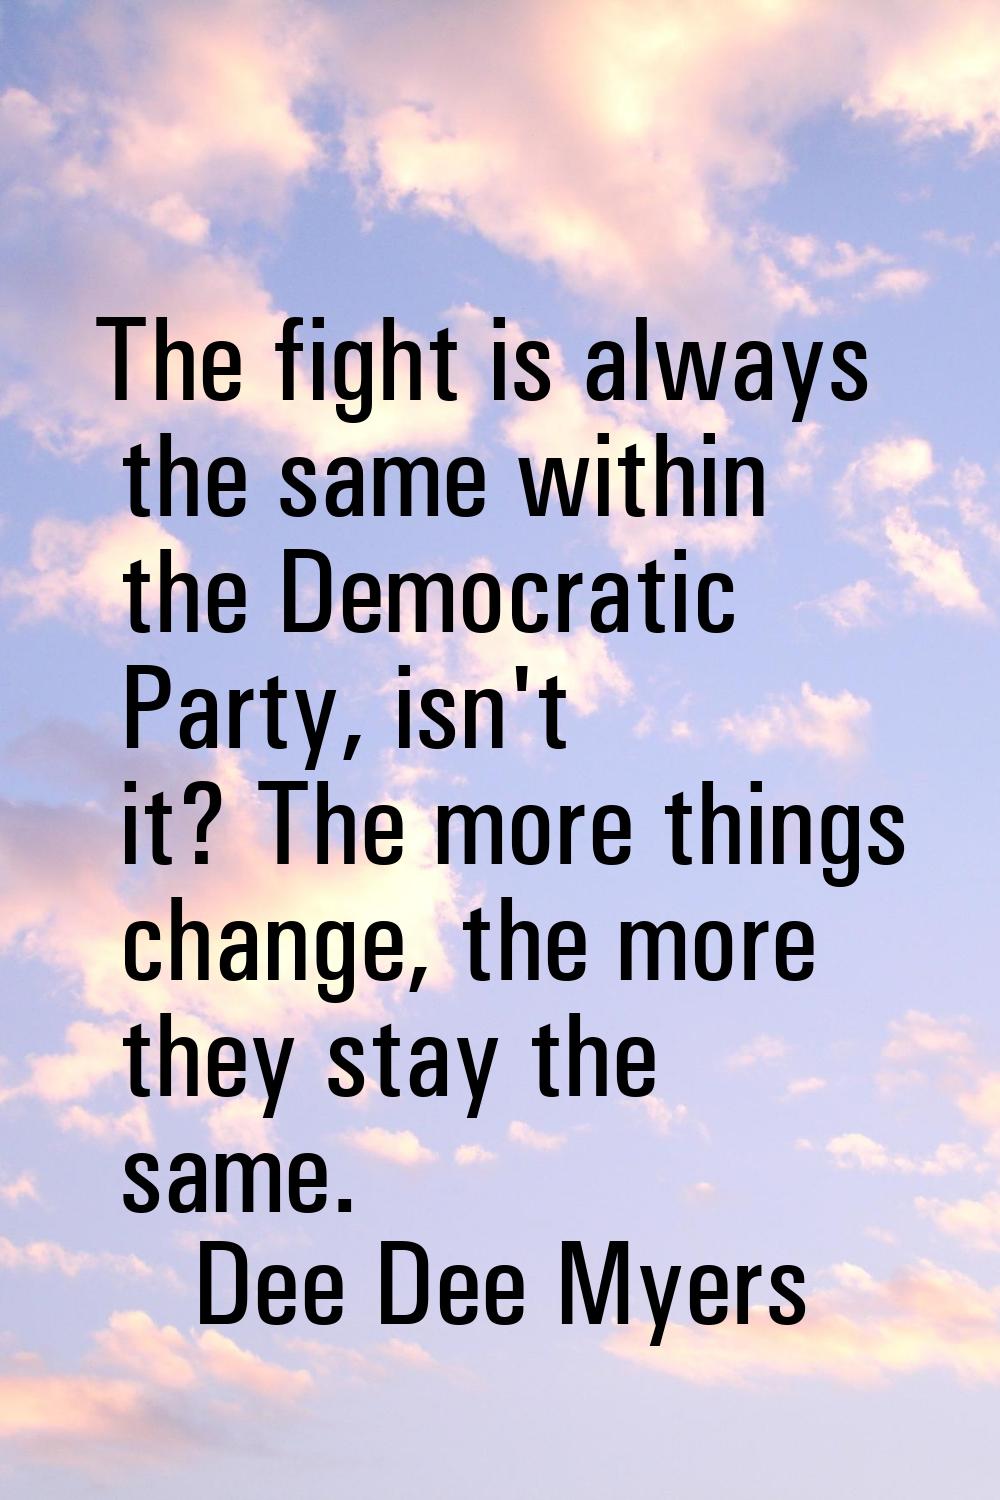 The fight is always the same within the Democratic Party, isn't it? The more things change, the mor